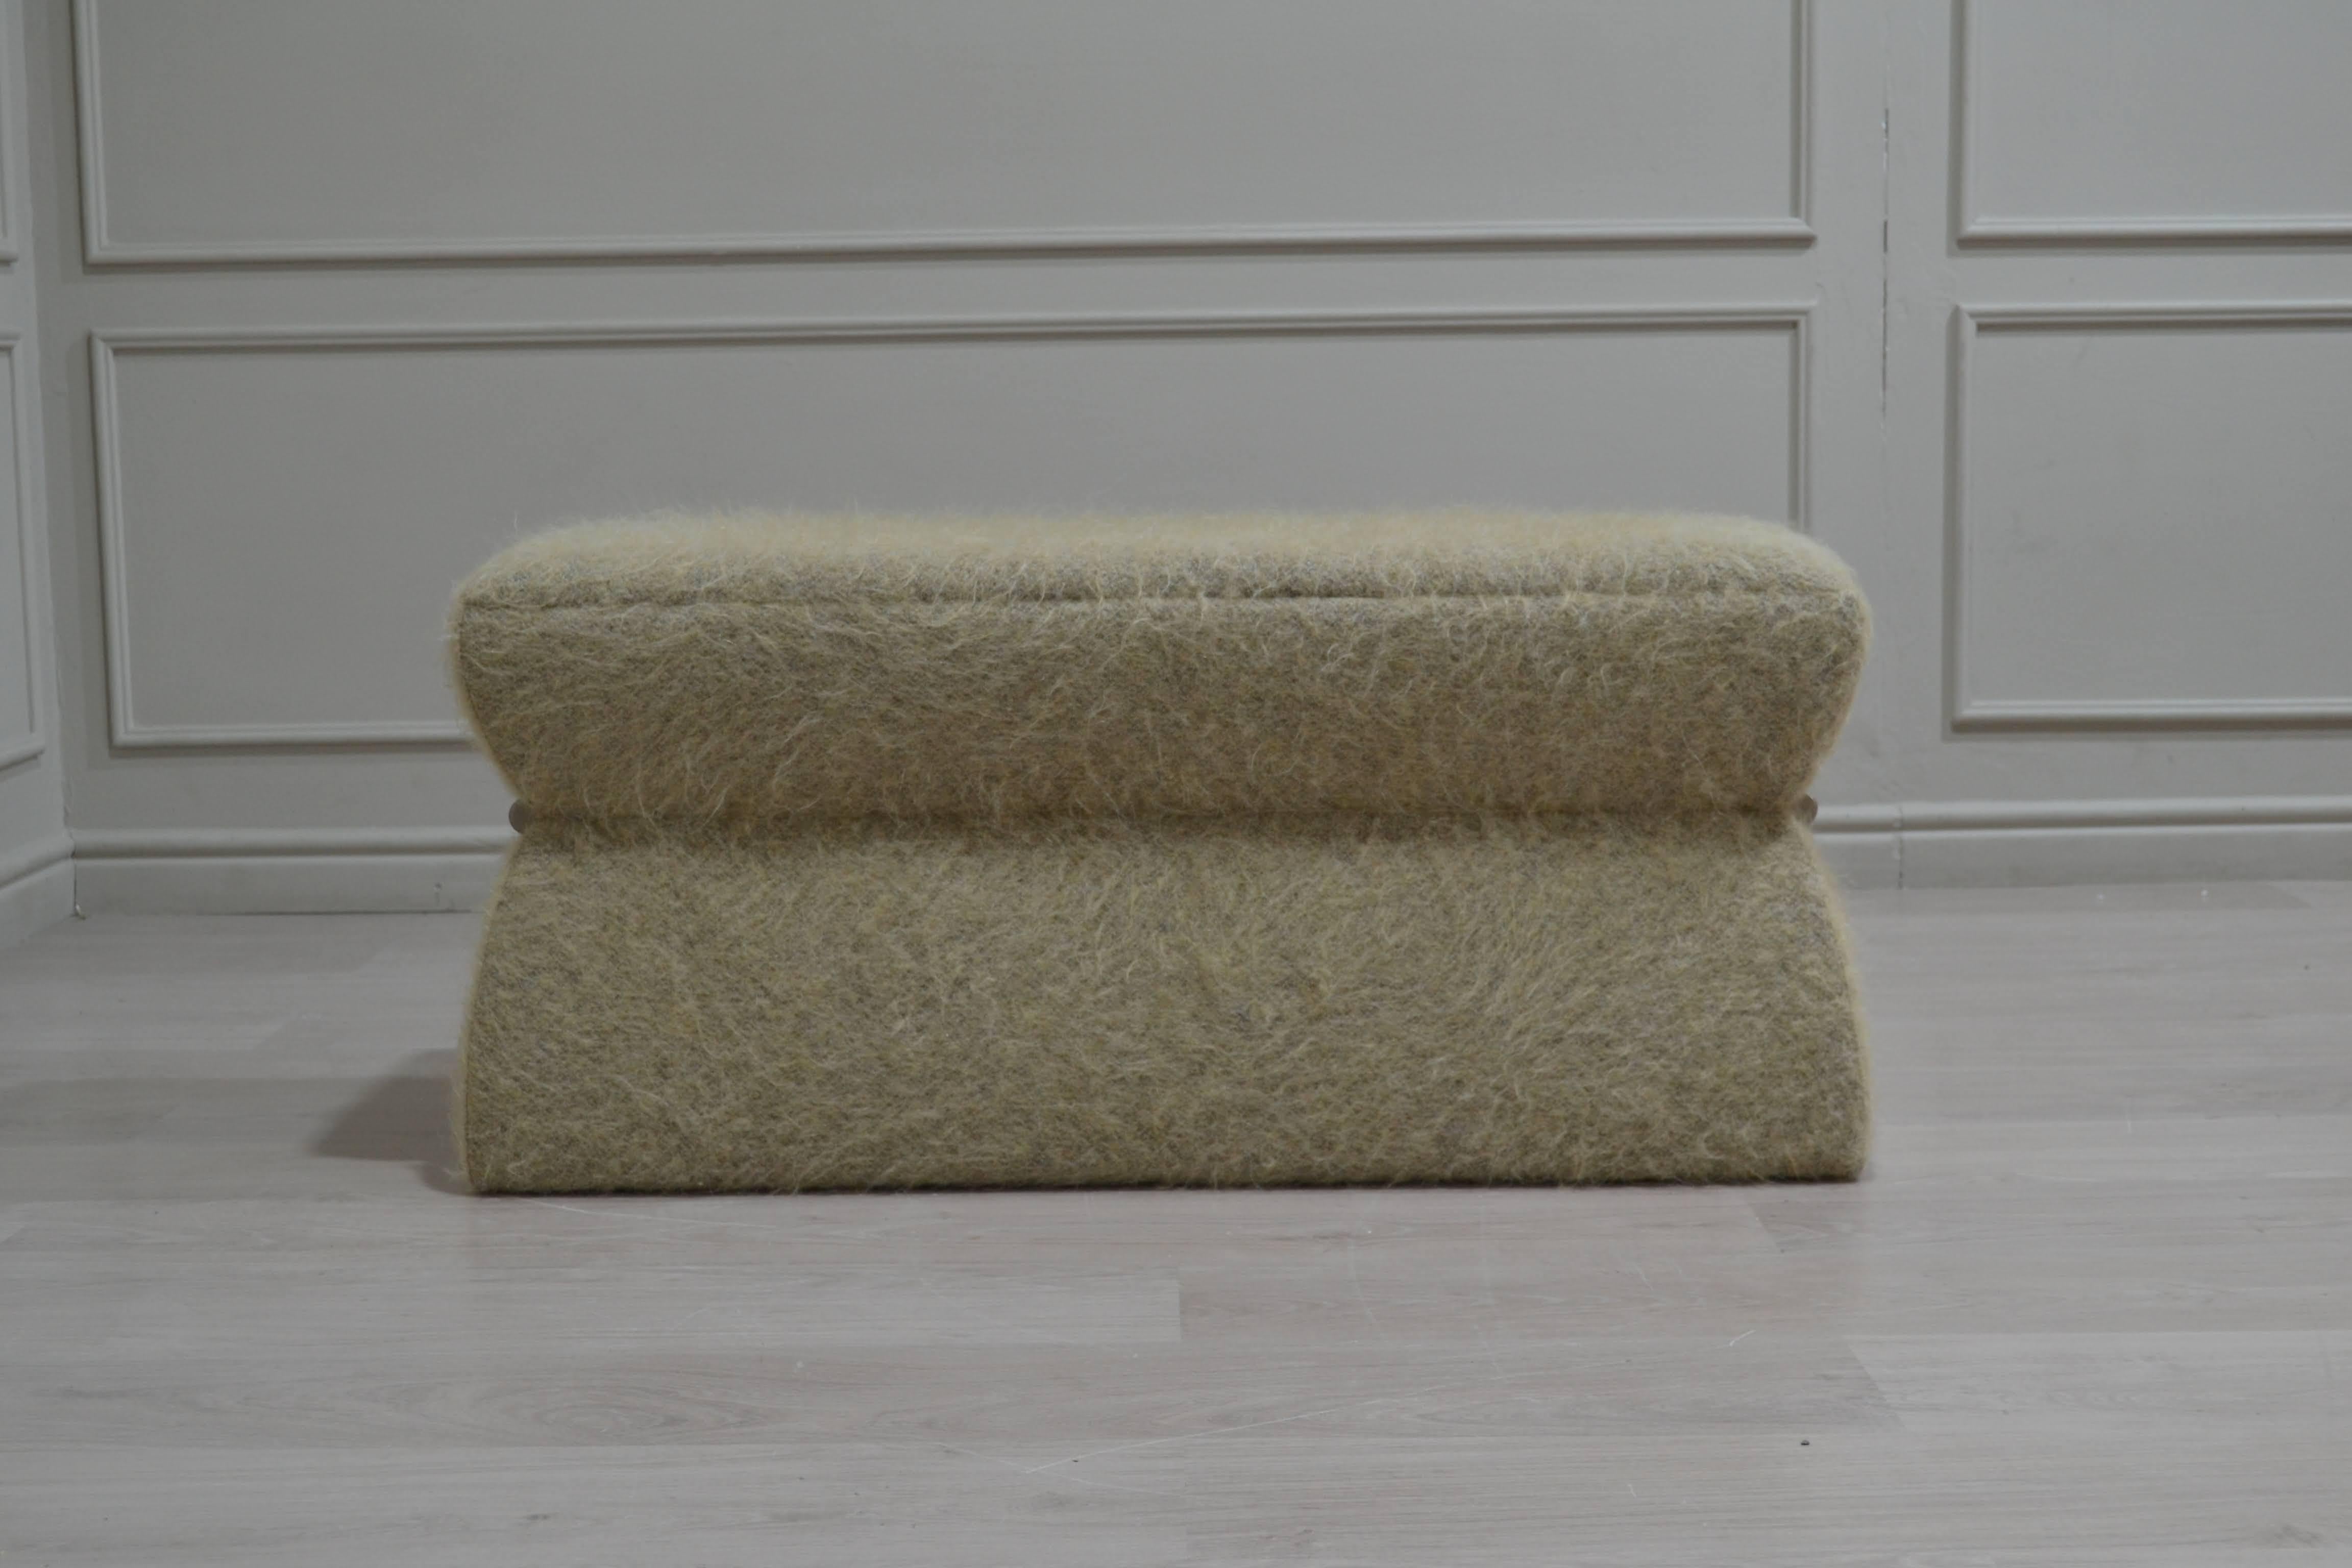 Upholstery 'Cusi' Bench in Pierre Frey Quinoa Mohair For Sale